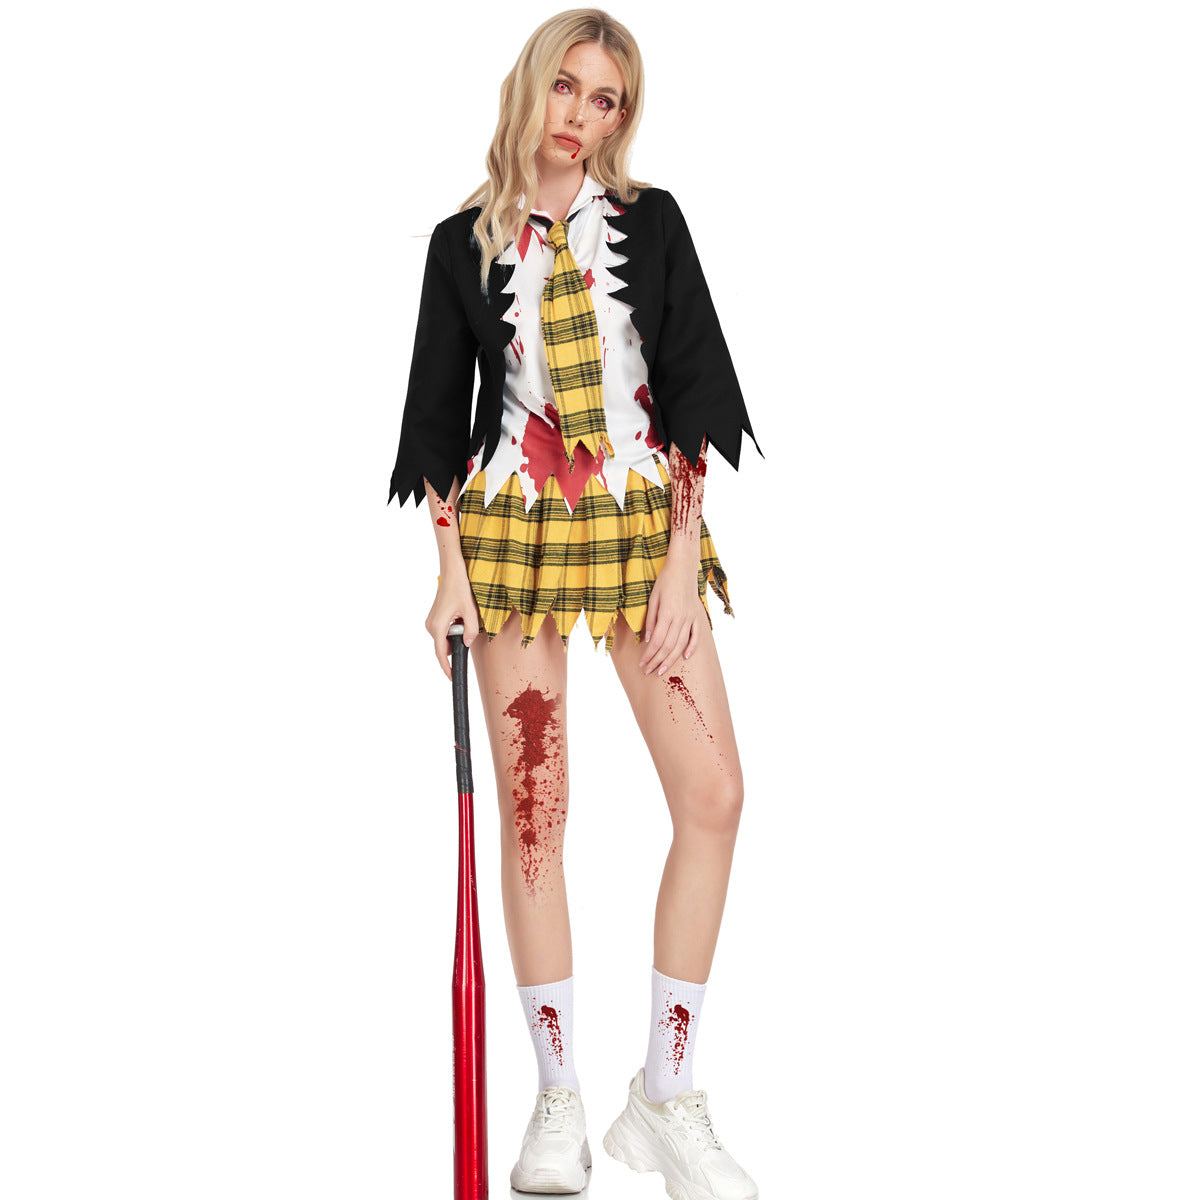 Adult Female Zombie Bloody Horror Campus Dress Costumes